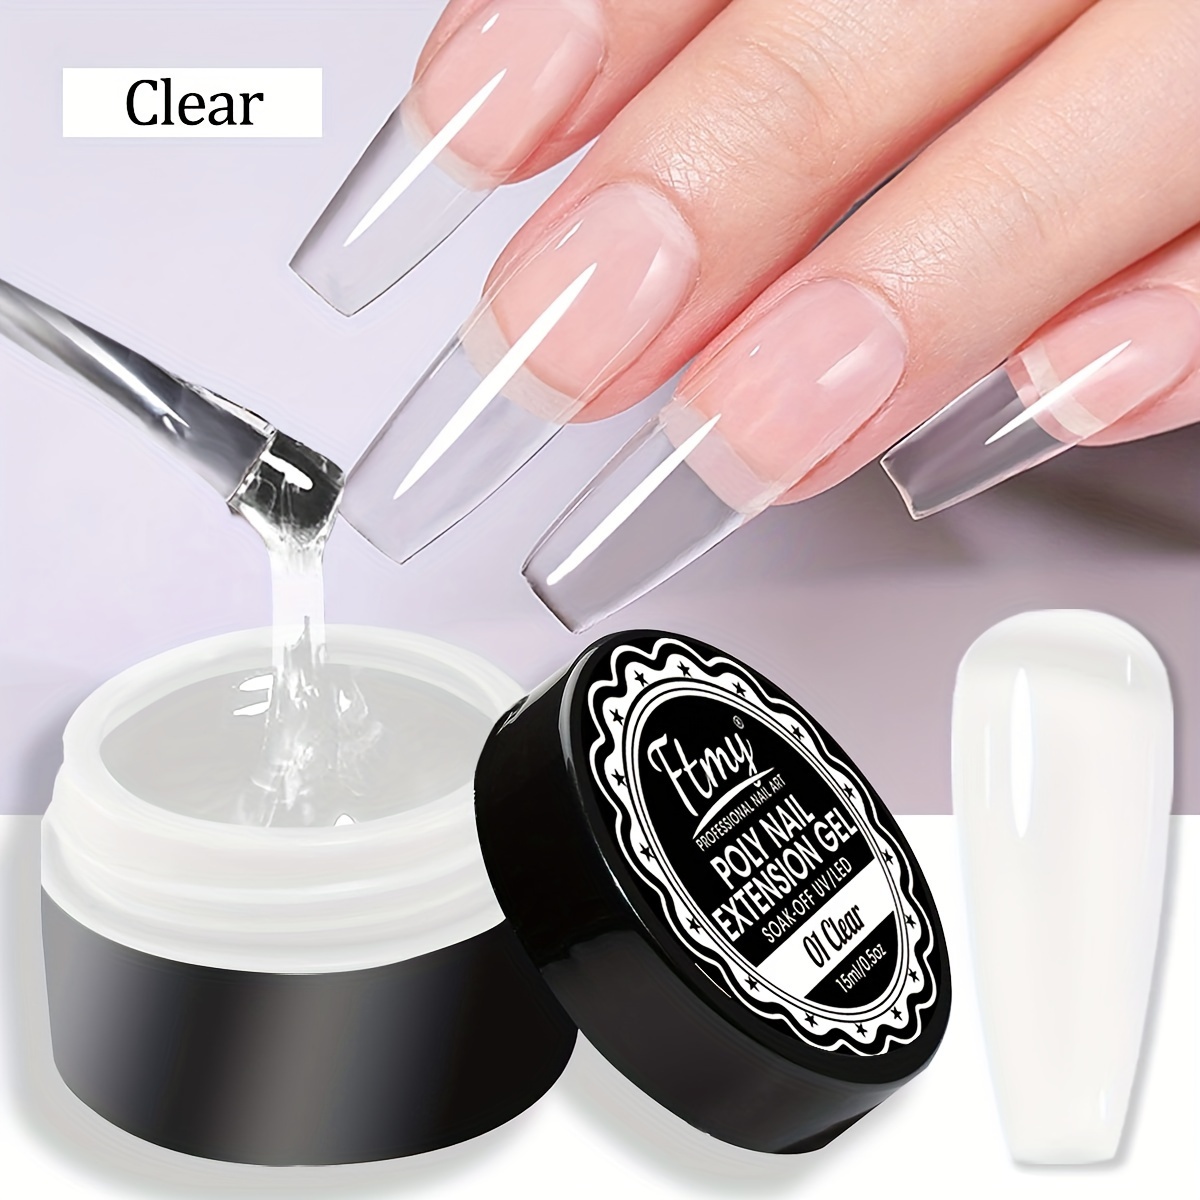 

Nail Gel, Quick Extension, High Transparency, Strong & Durable, Sculpting & Shaping, Glossy Finish, Manicure Salon Quality